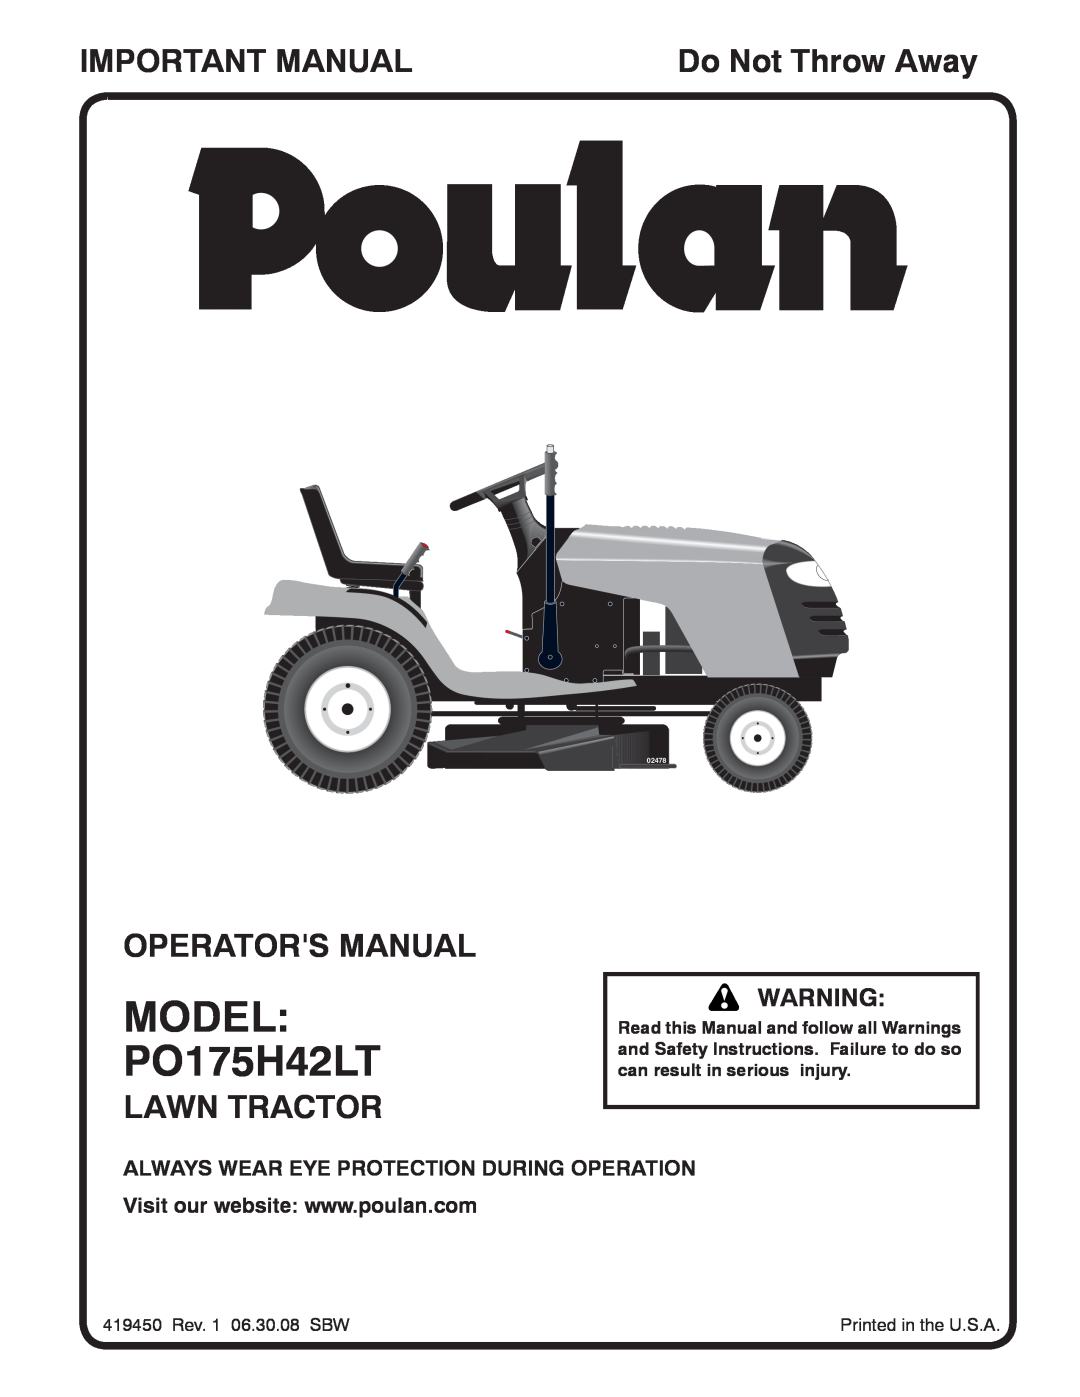 Poulan manual MODEL PO175H42LT, Important Manual, Operators Manual, Lawn Tractor, Do Not Throw Away, 02478 